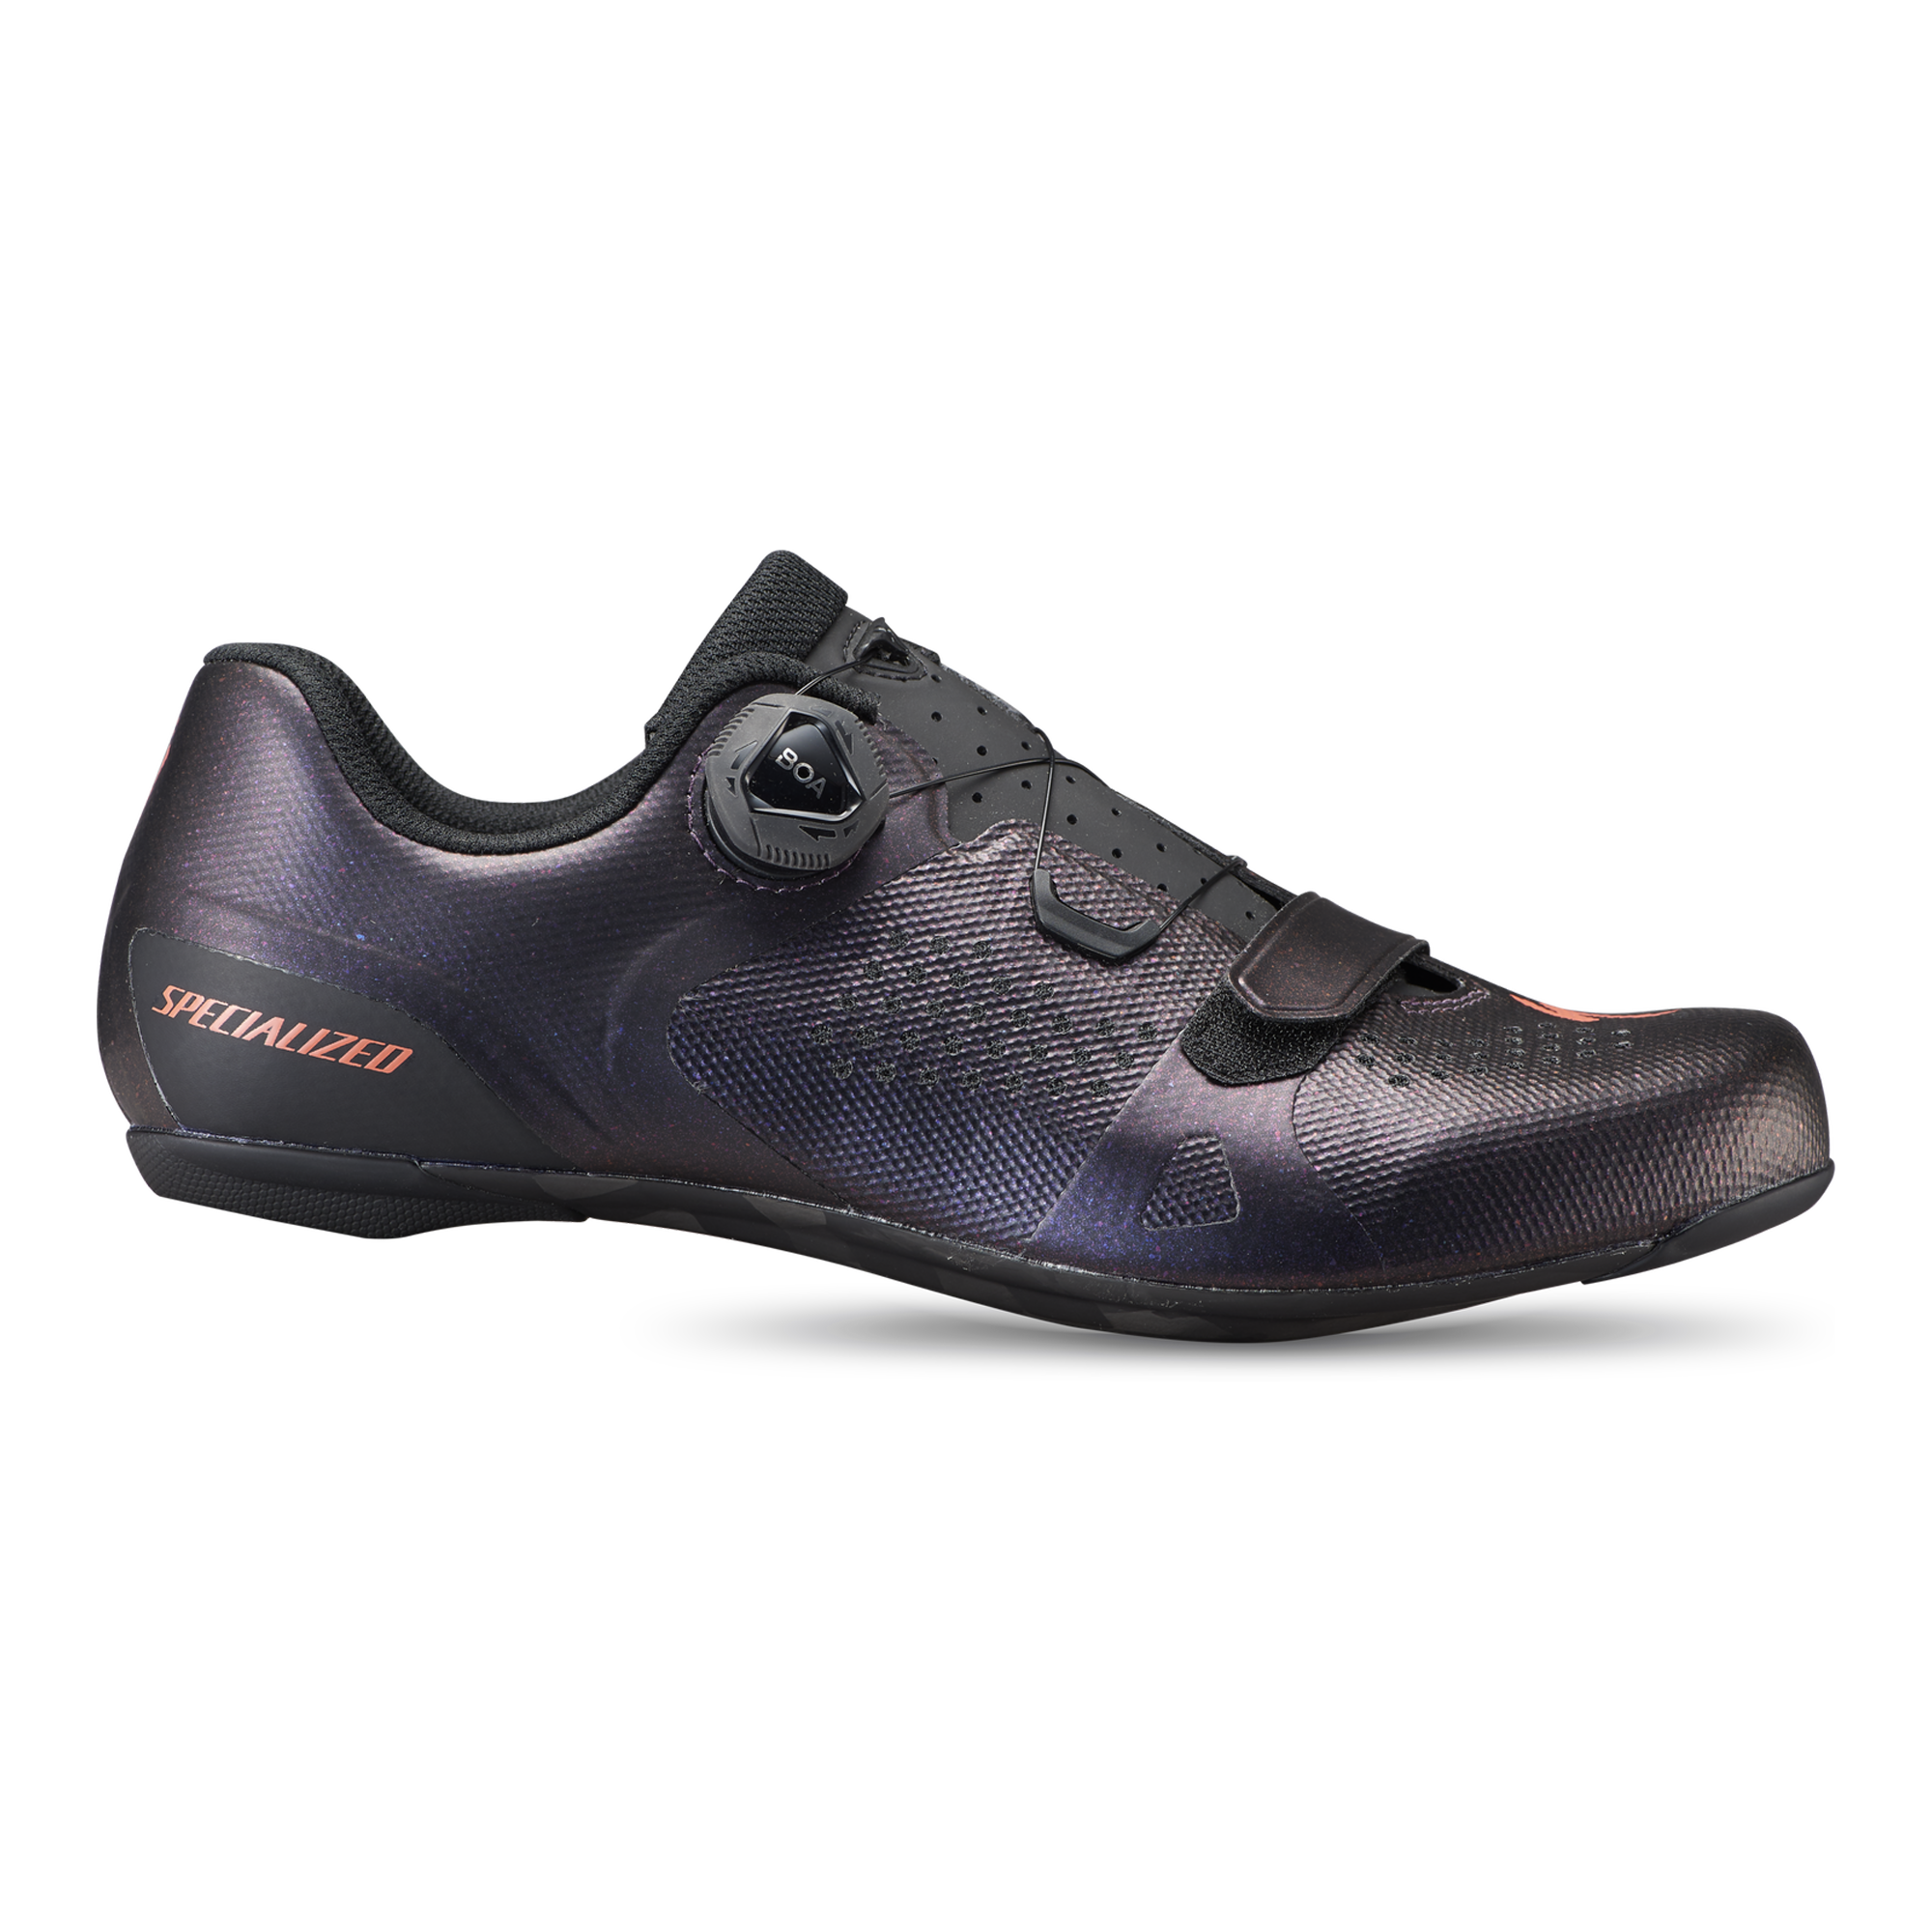 Chaussures Vélo Route Torch 2.0